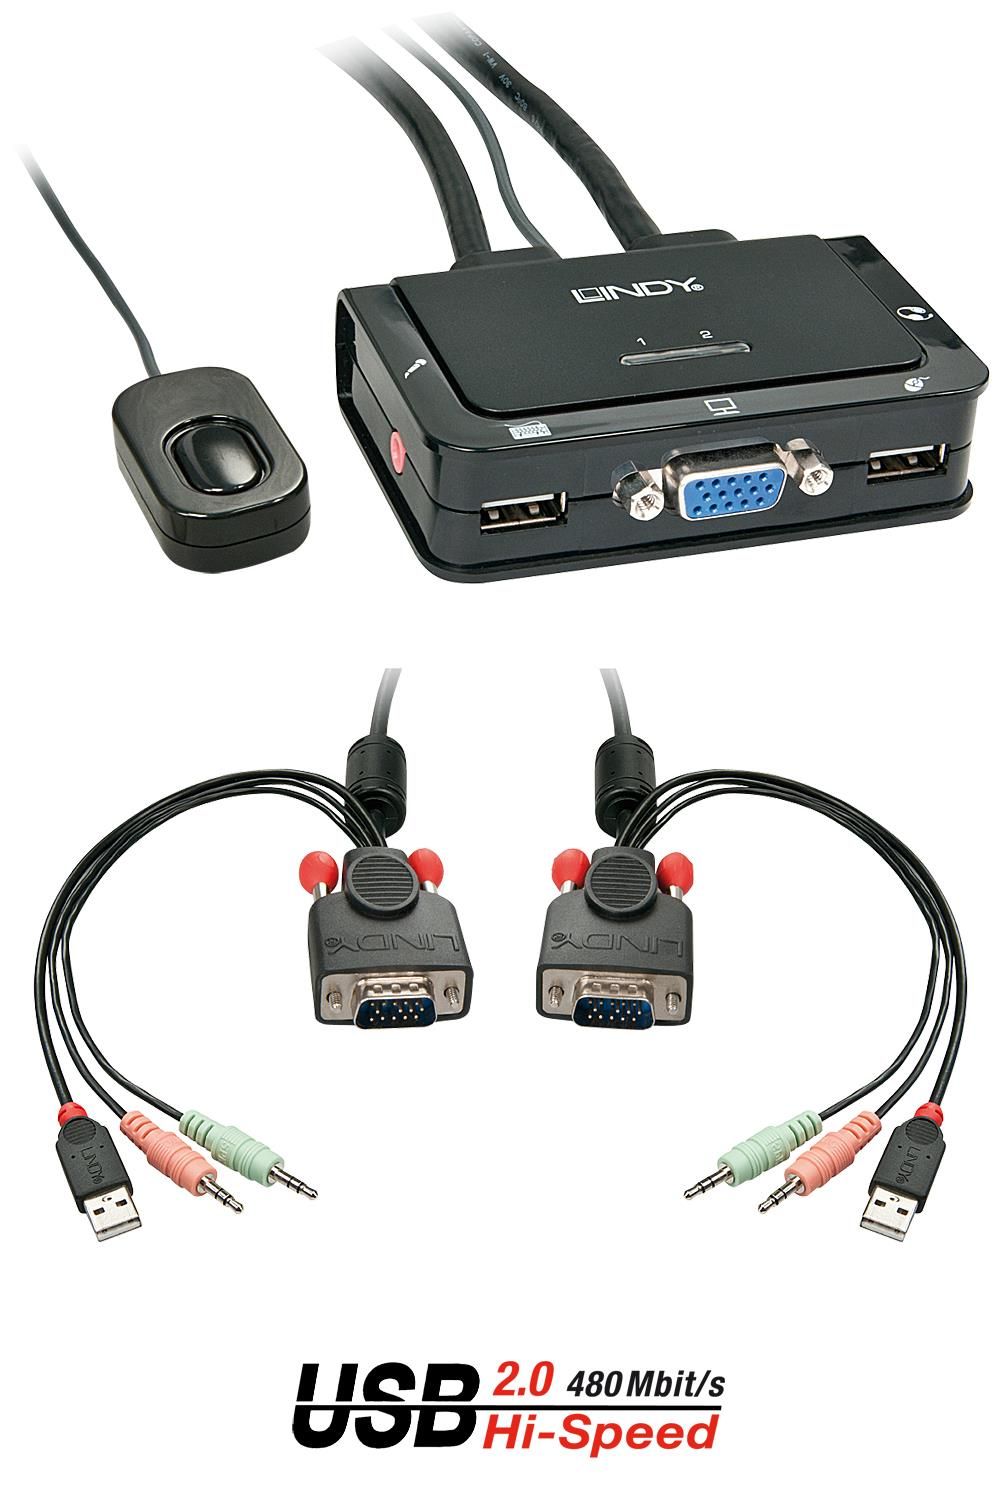 Lindy Switch Kvm Compact